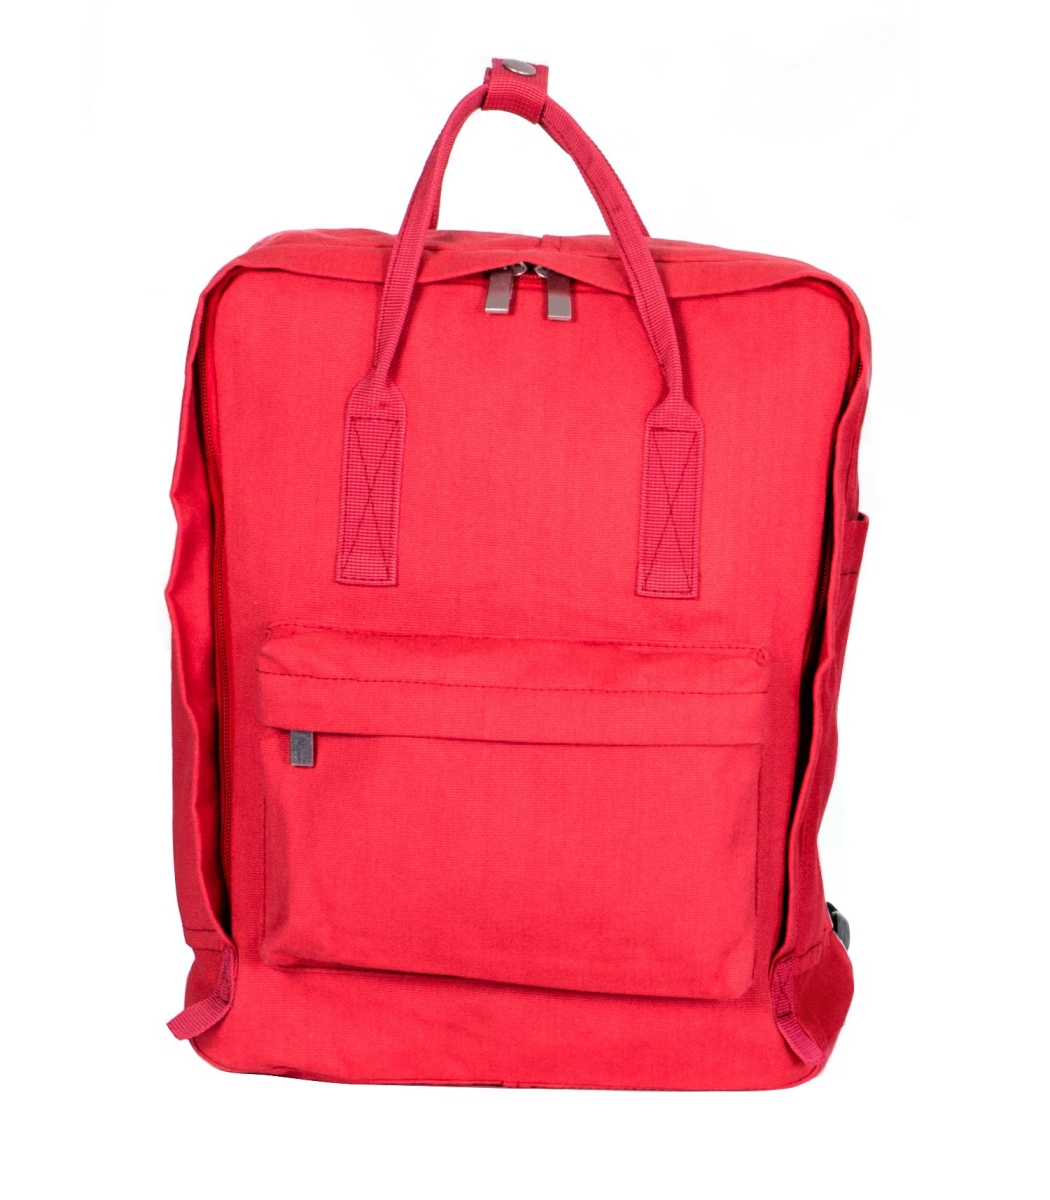 Mbk002-red Mini Backpack With Tablet Compartment - Red